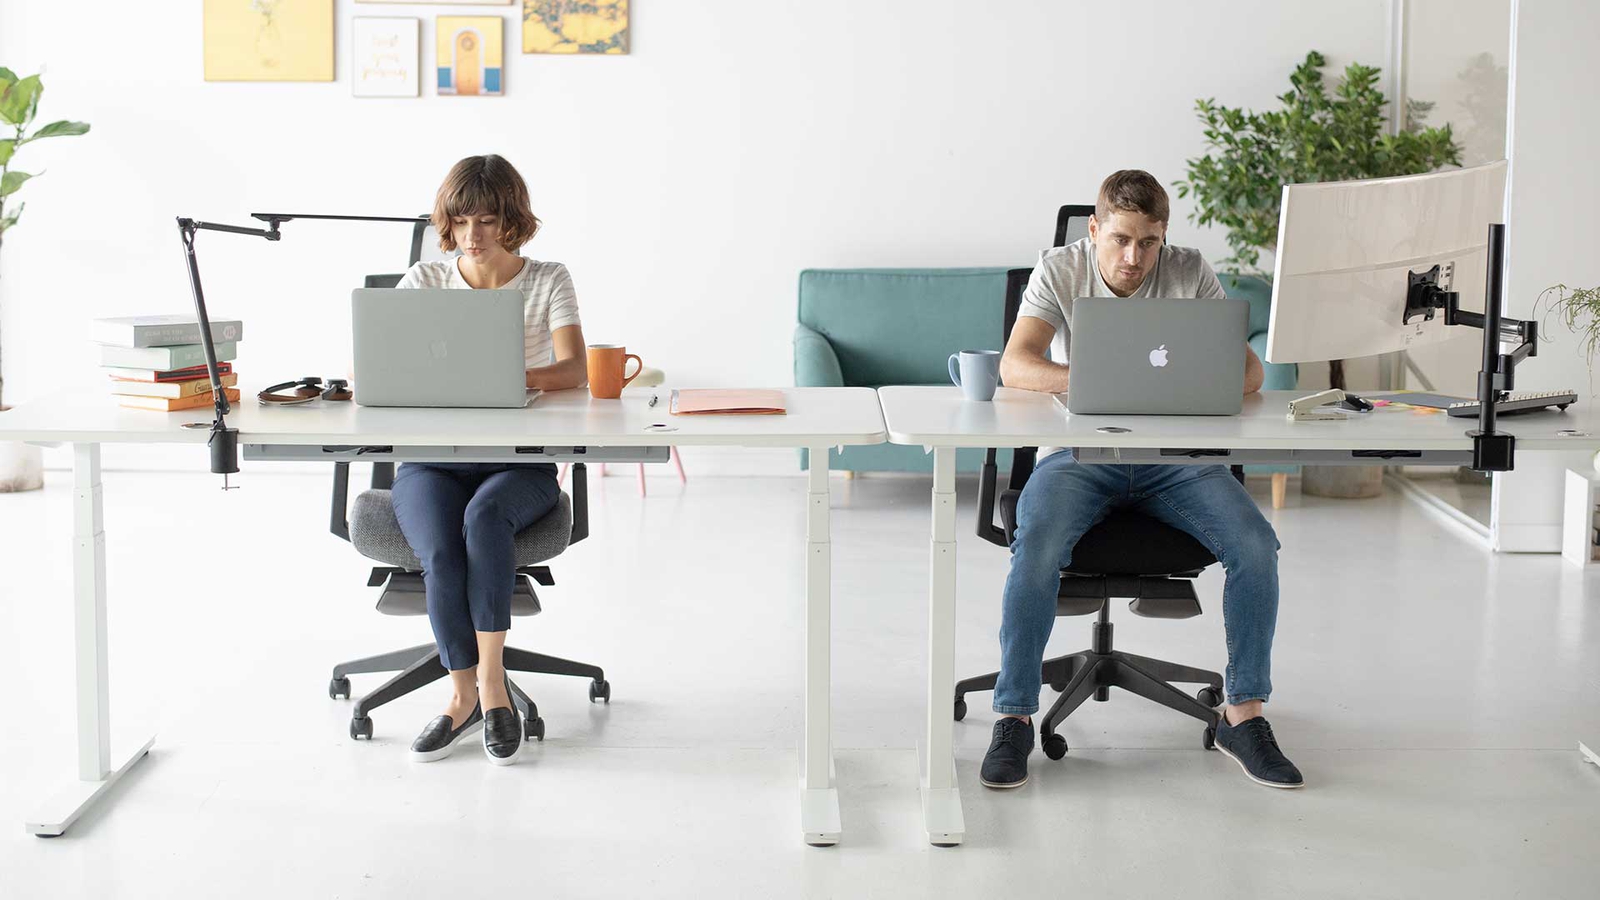 5 of the Best Accessories for an Ergonomic Office Setup